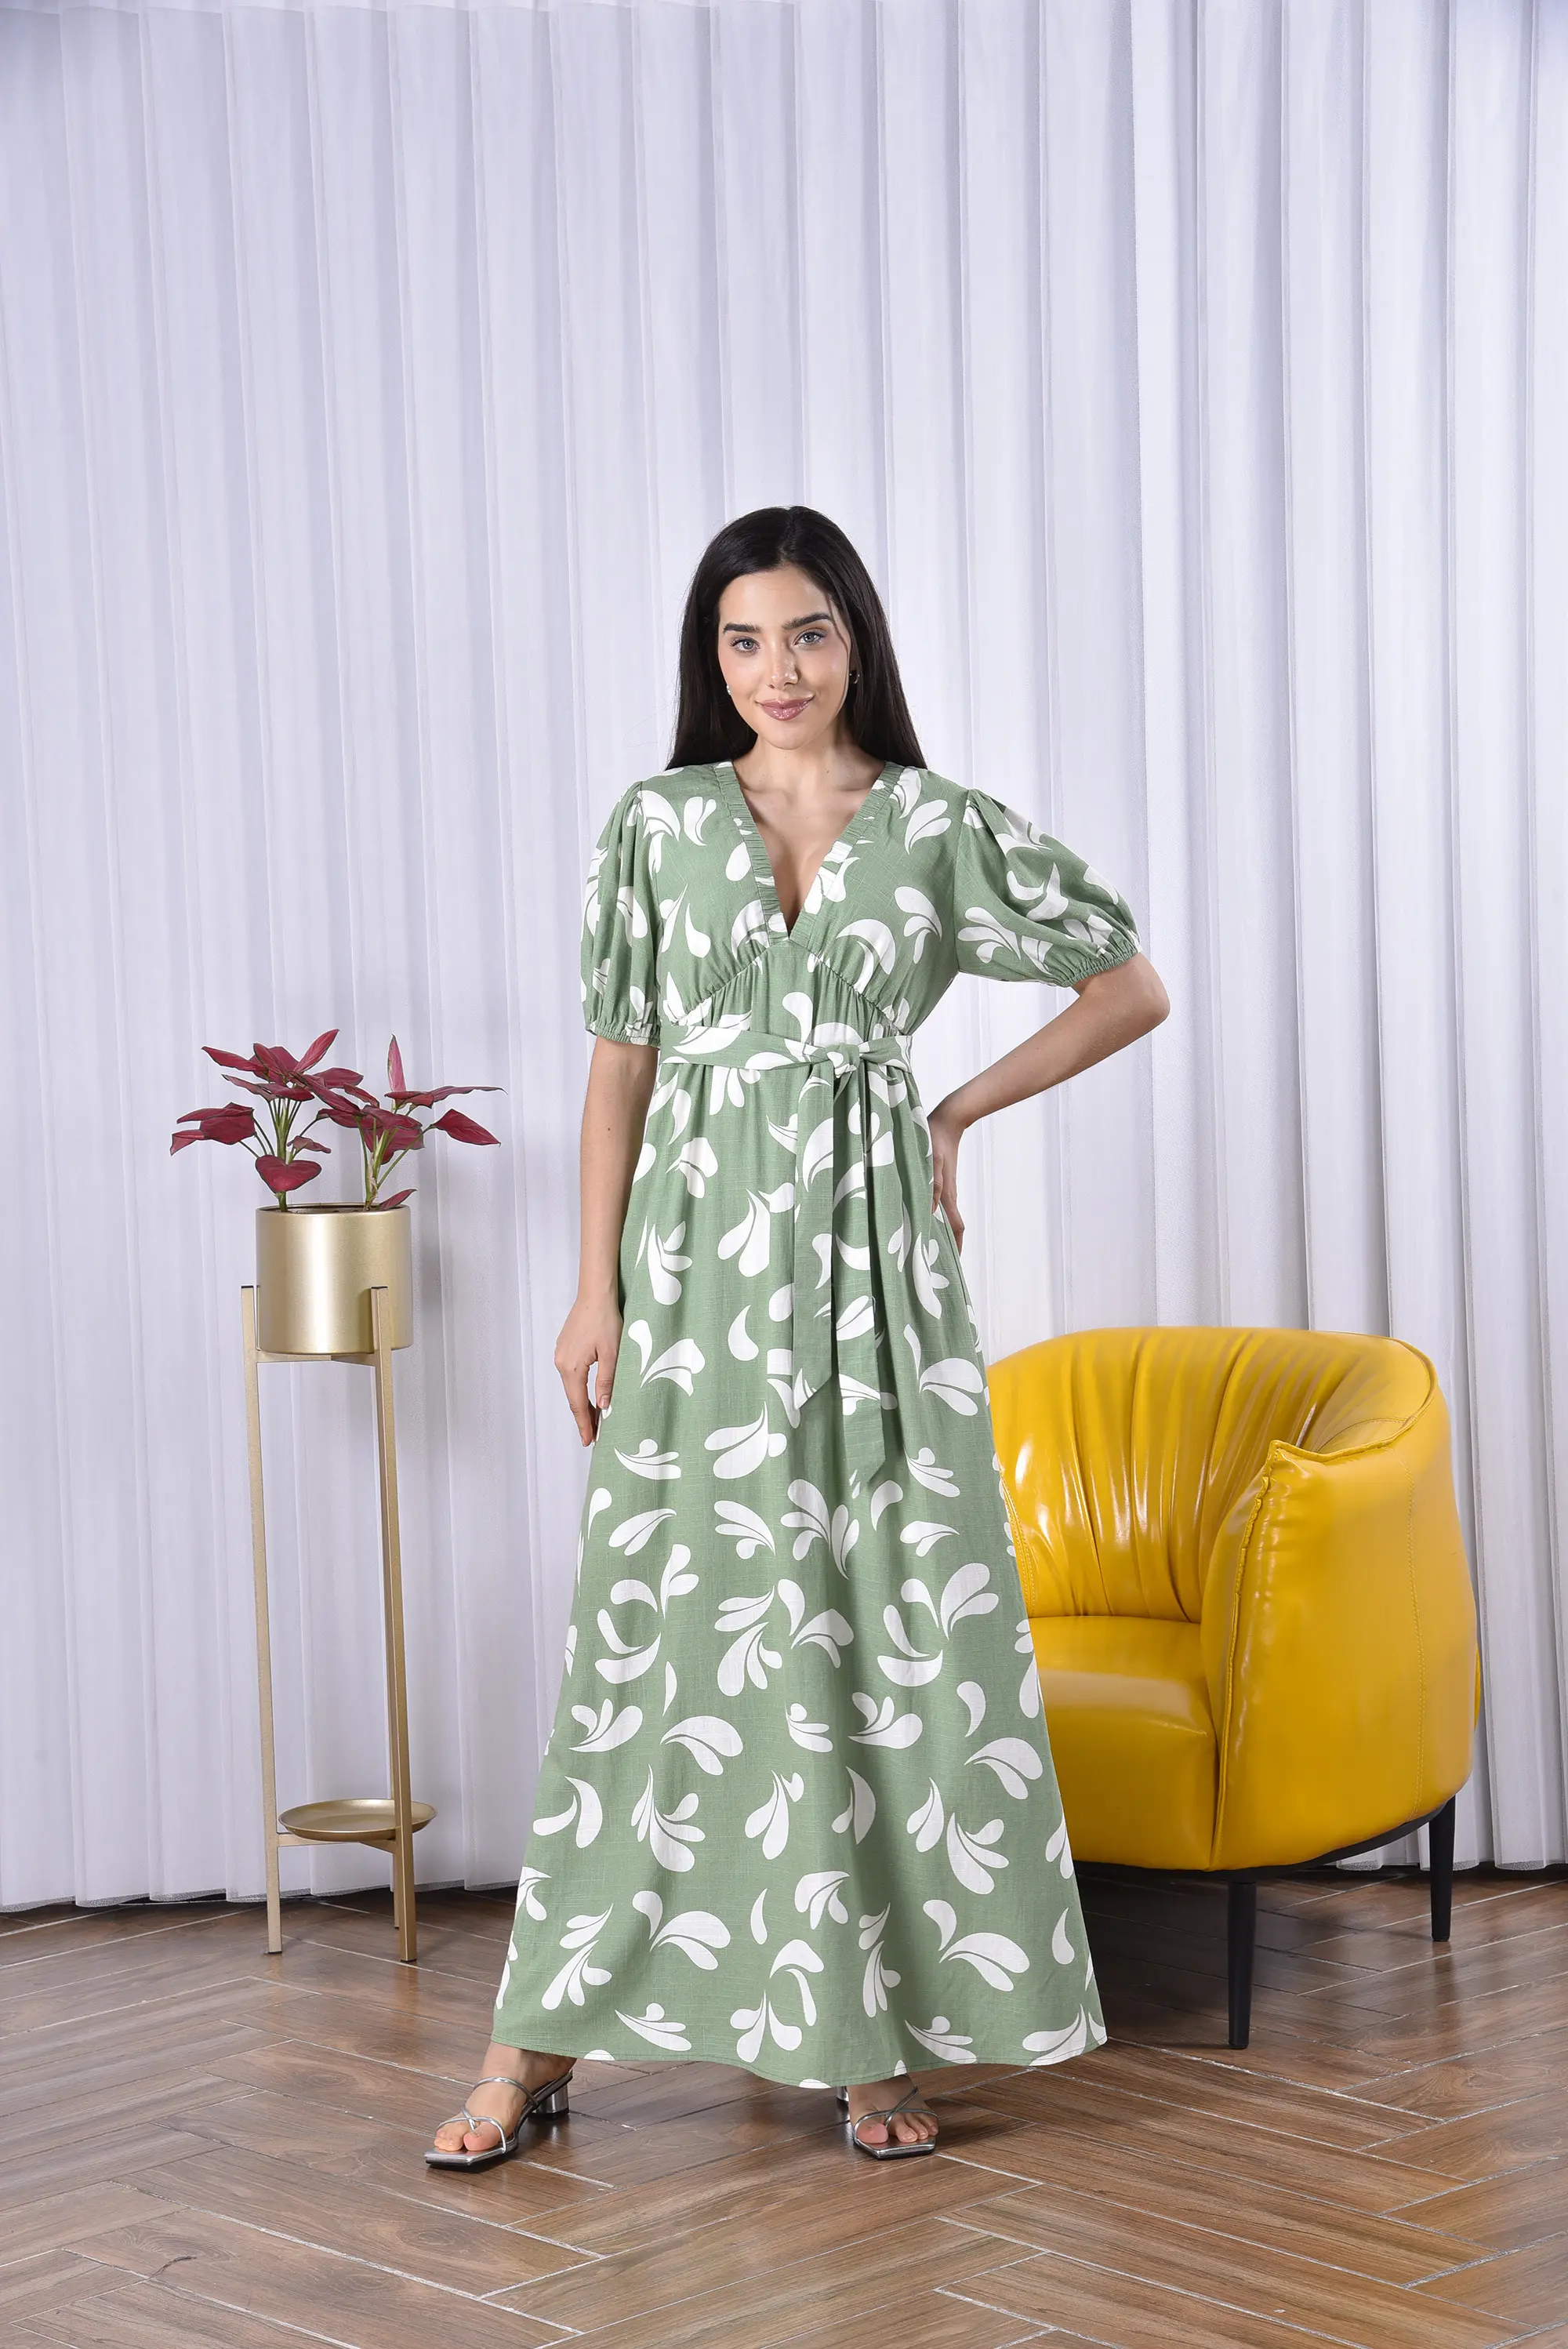 v-neck women lady elegant loose dress green casual bohemian floral printed belted large swing full length maxi dress for women